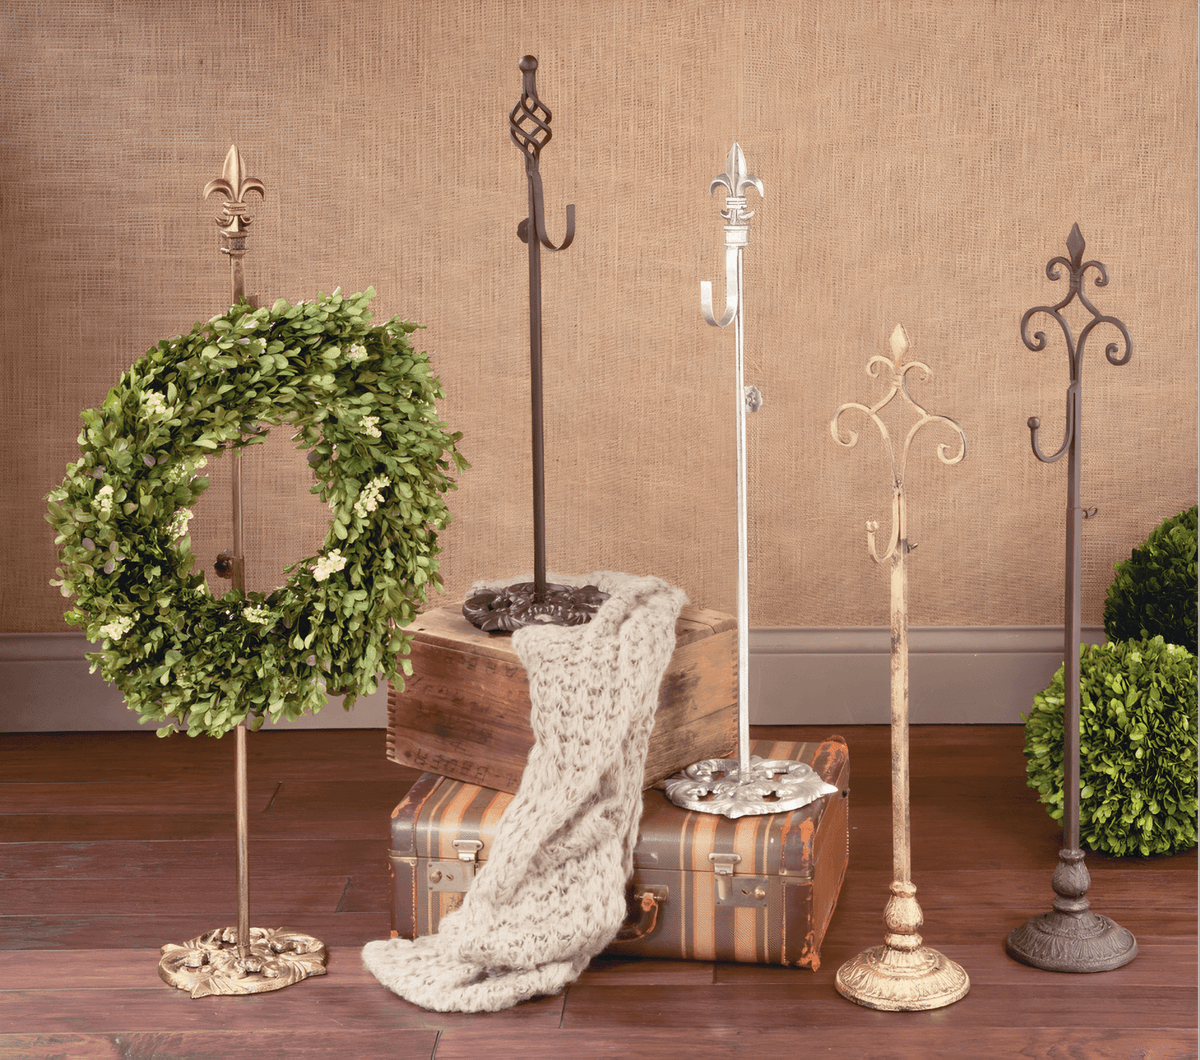 How to Make a Wreath Display Stand?